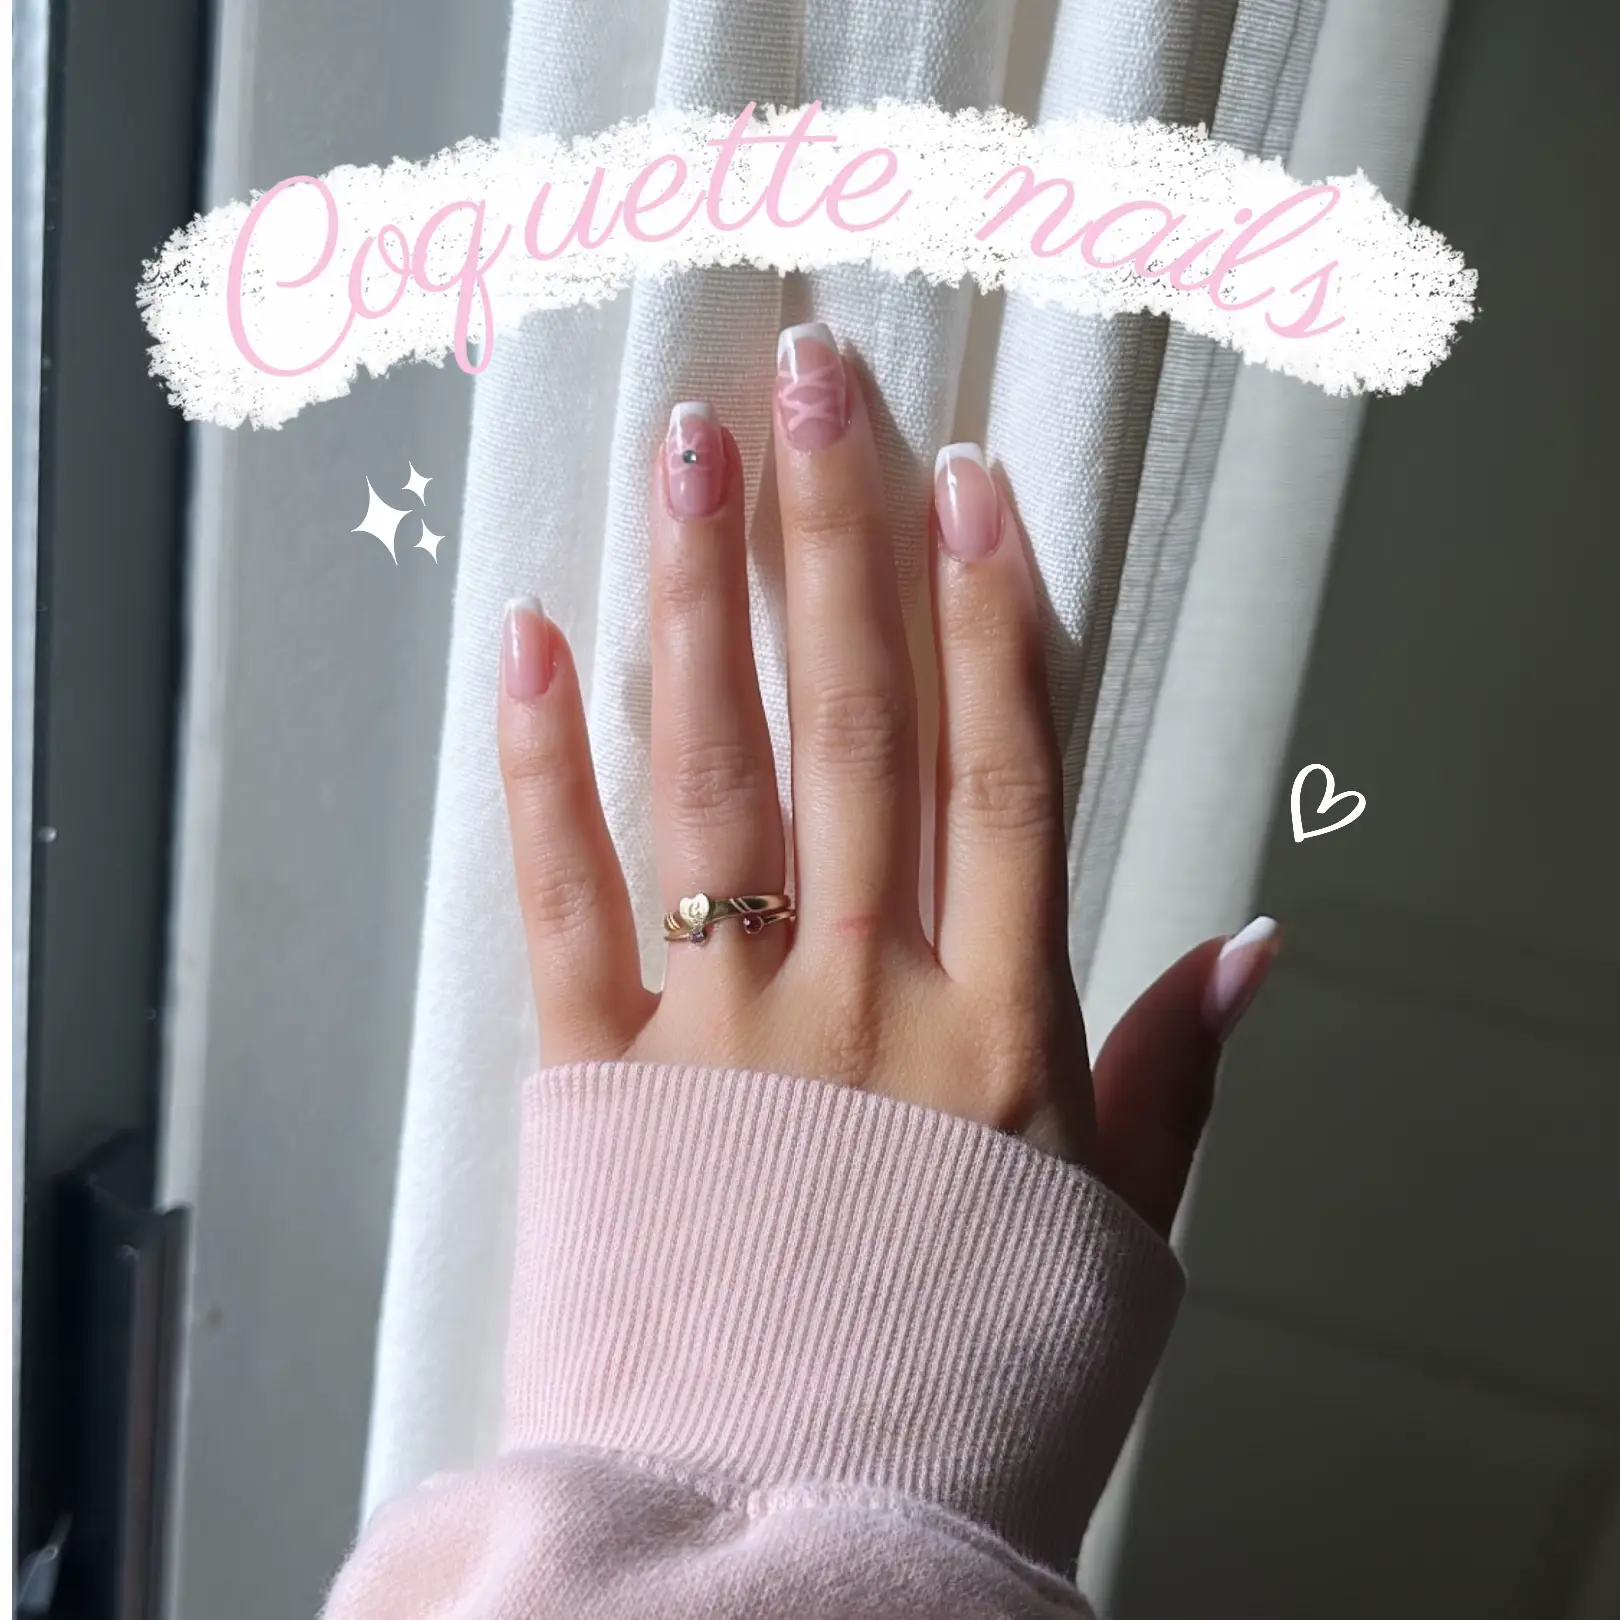 Coquette nails ✨🎀💖, Gallery posted by El